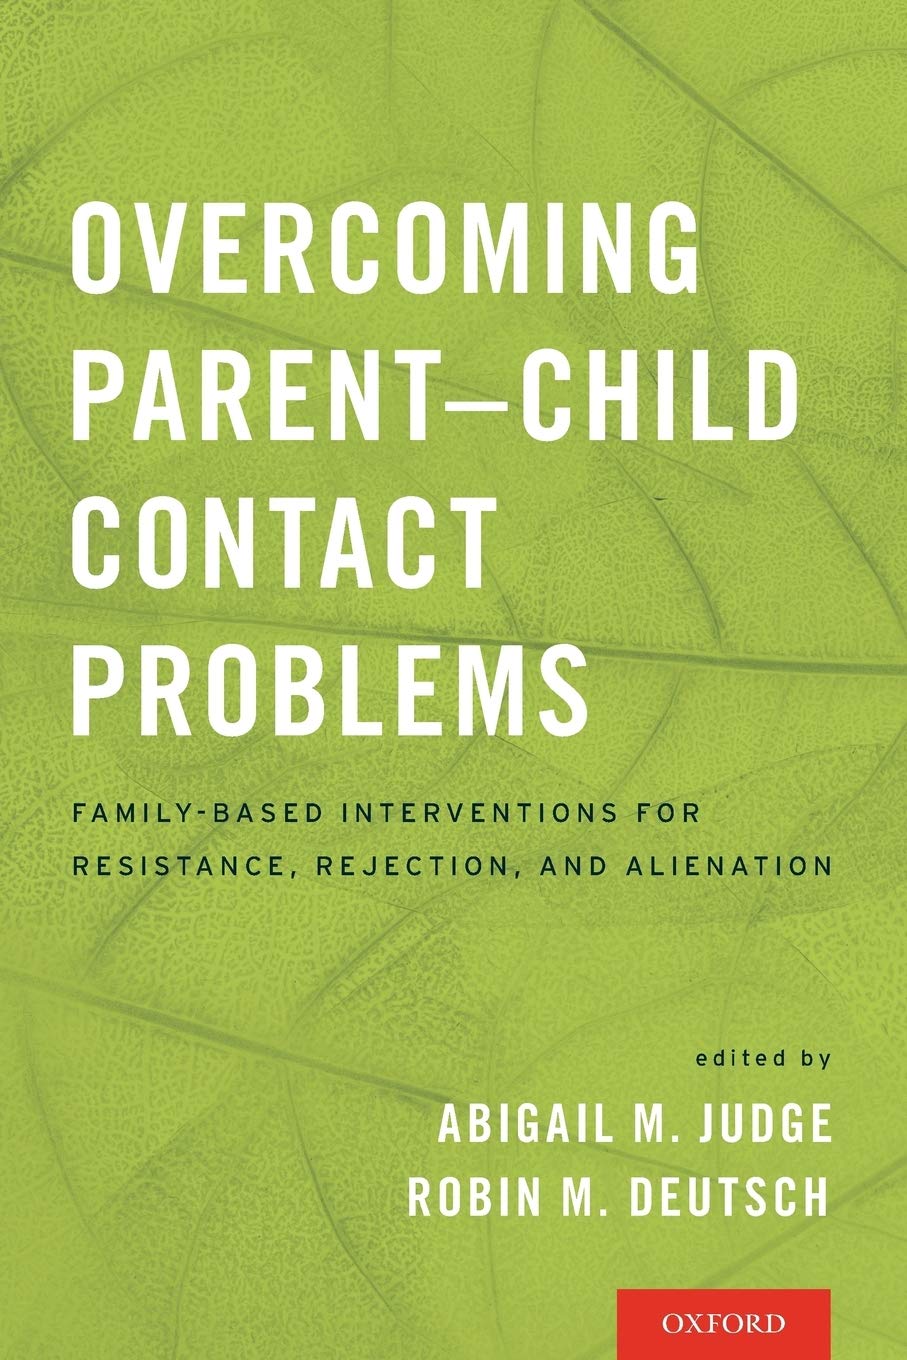 Overcoming Parent-Child Contact Problems: Family-Based Interventions for Resistance, Rejection, and Alienation 1st Edition